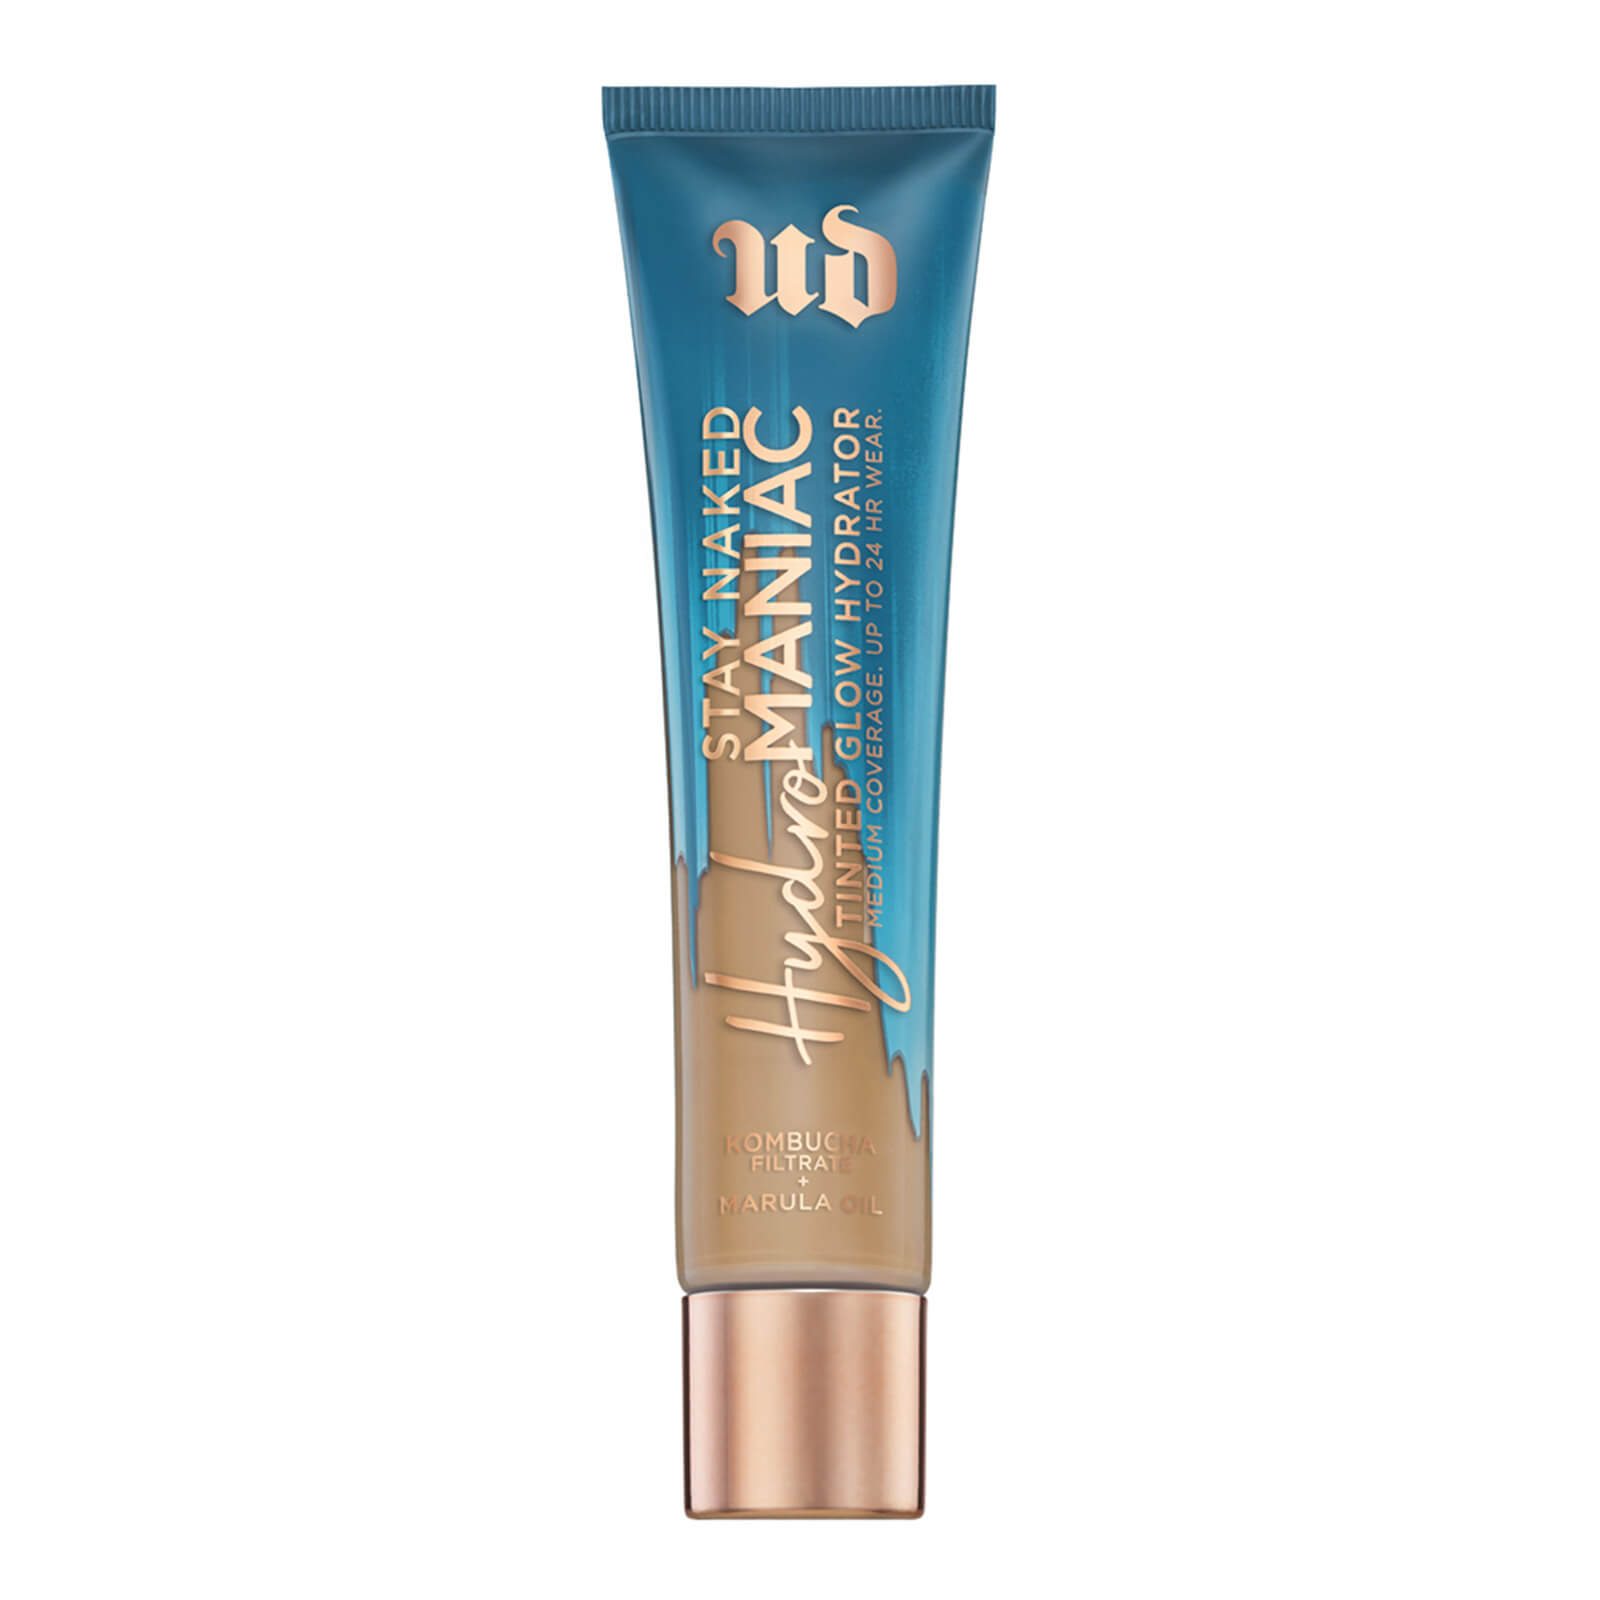 Urban Decay Stay Naked Hydromaniac Tinted Glow Hydrator 35ml (Various Shades) - 51